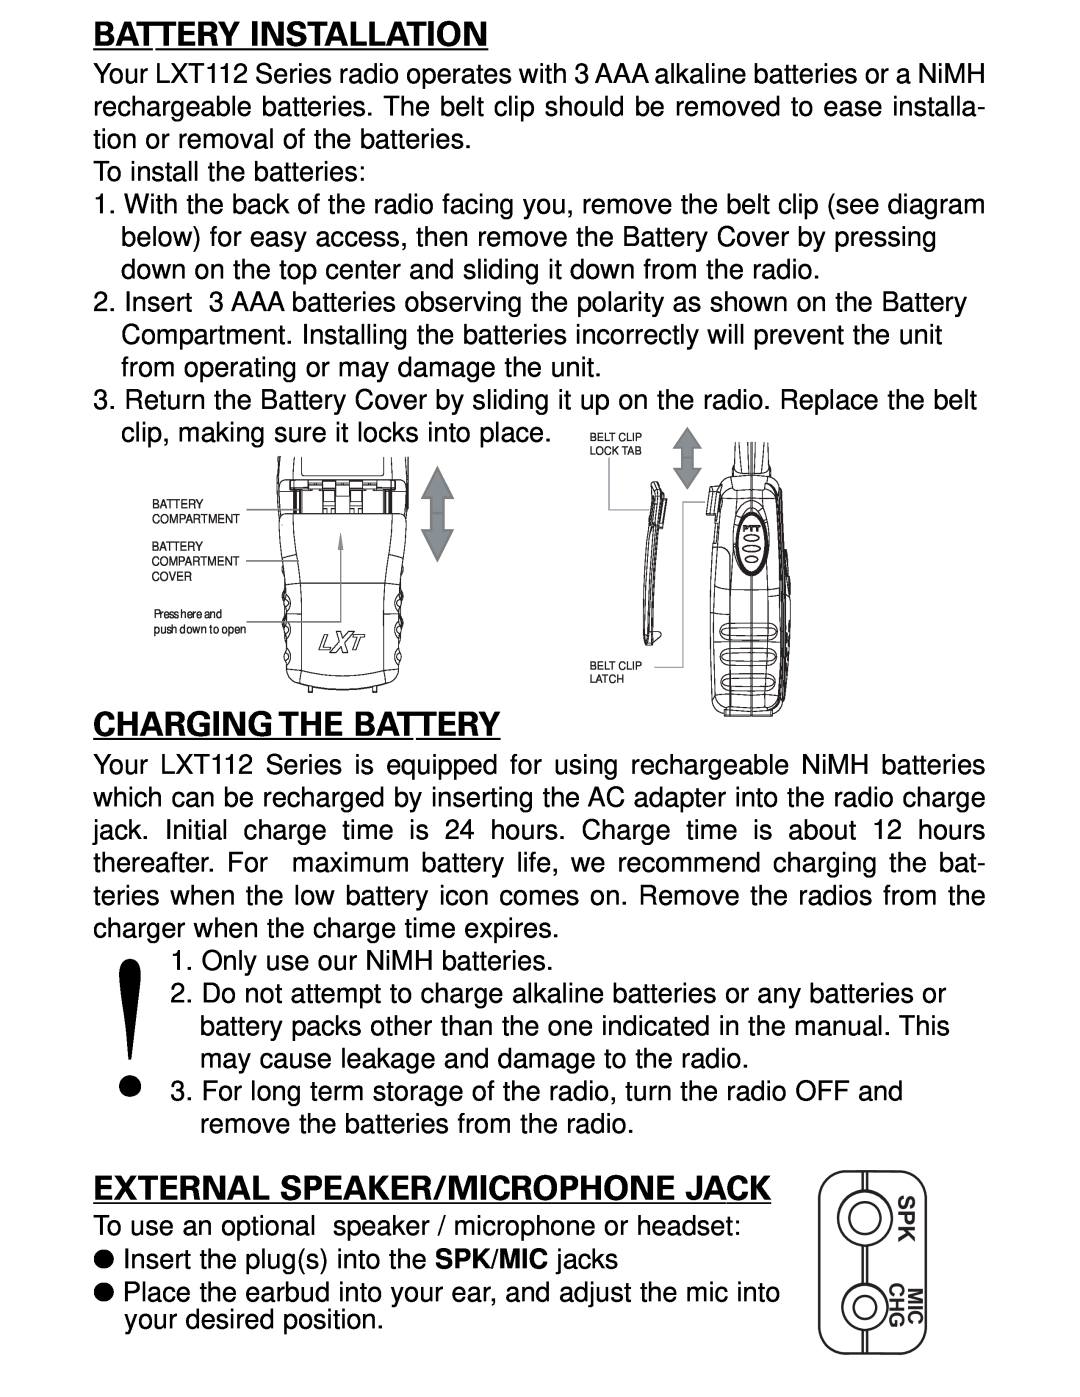 Midland Radio LXT112 Series owner manual Battery Installation, Charging The Battery, External Speaker/Microphone Jack 